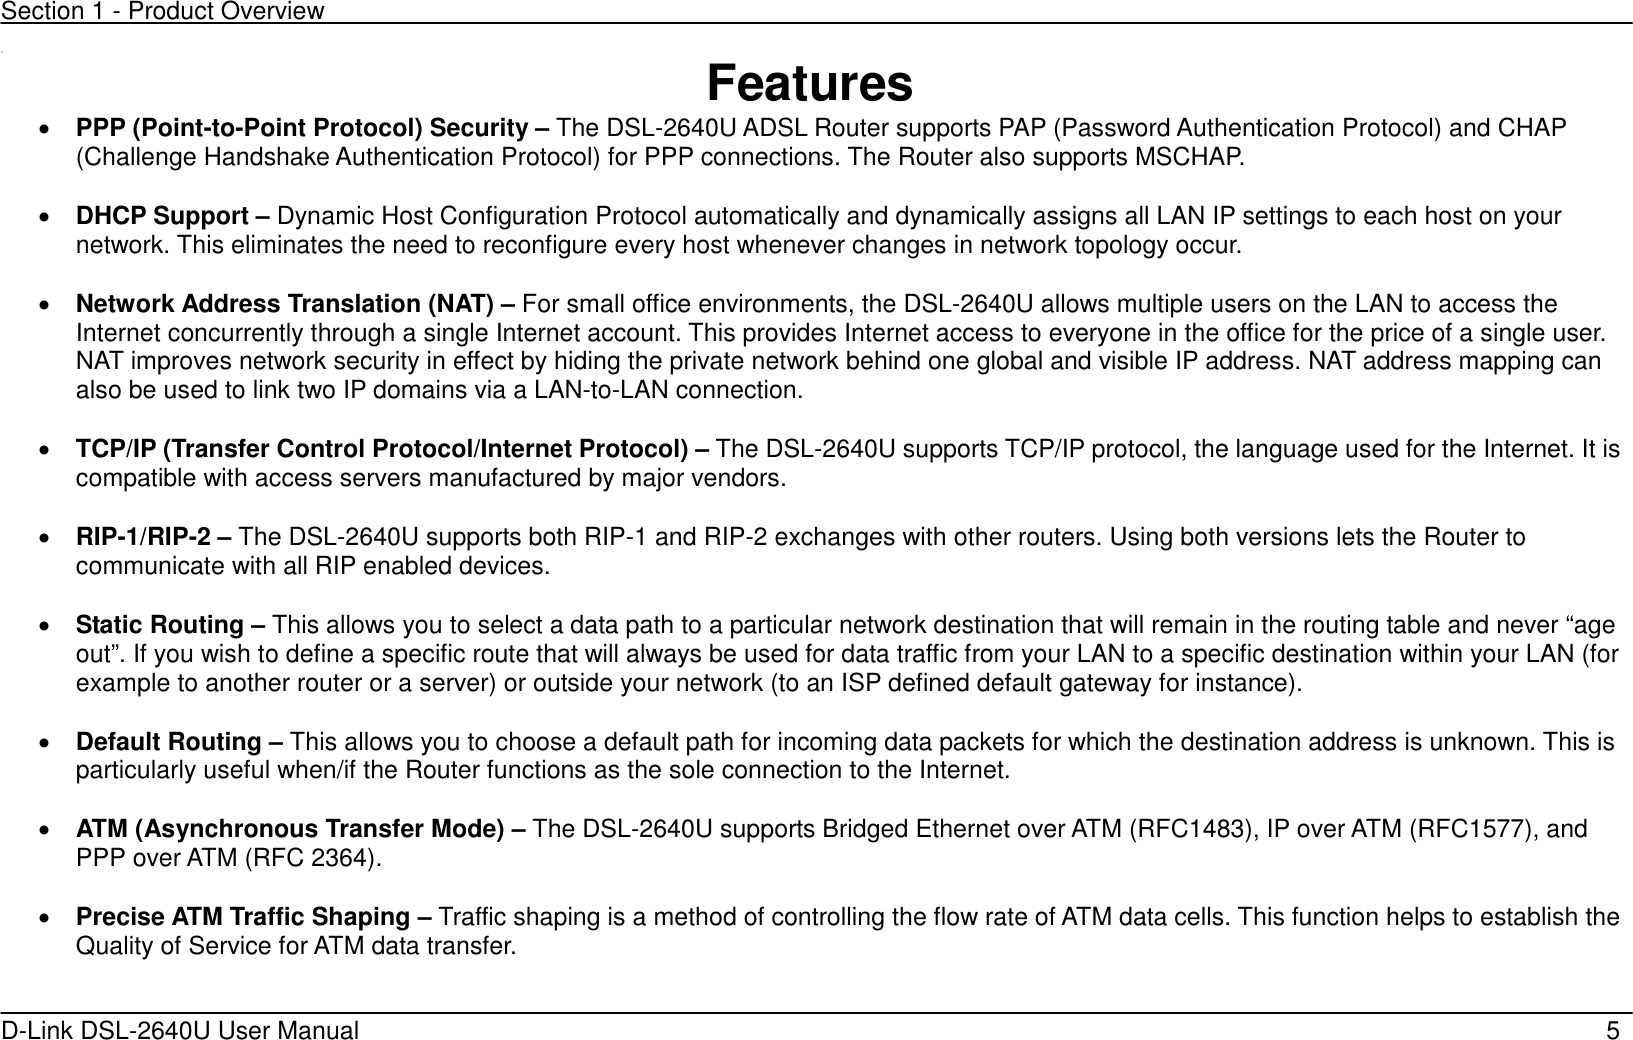 Section 1 - Product Overview  D-Link DSL-2640U User Manual    5 11  Features • PPP (Point-to-Point Protocol) Security – The DSL-2640U ADSL Router supports PAP (Password Authentication Protocol) and CHAP (Challenge Handshake Authentication Protocol) for PPP connections. The Router also supports MSCHAP.  • DHCP Support – Dynamic Host Configuration Protocol automatically and dynamically assigns all LAN IP settings to each host on your network. This eliminates the need to reconfigure every host whenever changes in network topology occur.  • Network Address Translation (NAT) – For small office environments, the DSL-2640U allows multiple users on the LAN to access the Internet concurrently through a single Internet account. This provides Internet access to everyone in the office for the price of a single user. NAT improves network security in effect by hiding the private network behind one global and visible IP address. NAT address mapping can also be used to link two IP domains via a LAN-to-LAN connection.  • TCP/IP (Transfer Control Protocol/Internet Protocol) – The DSL-2640U supports TCP/IP protocol, the language used for the Internet. It is compatible with access servers manufactured by major vendors.  • RIP-1/RIP-2 – The DSL-2640U supports both RIP-1 and RIP-2 exchanges with other routers. Using both versions lets the Router to communicate with all RIP enabled devices.  • Static Routing – This allows you to select a data path to a particular network destination that will remain in the routing table and never “age out”. If you wish to define a specific route that will always be used for data traffic from your LAN to a specific destination within your LAN (for example to another router or a server) or outside your network (to an ISP defined default gateway for instance).     • Default Routing – This allows you to choose a default path for incoming data packets for which the destination address is unknown. This is particularly useful when/if the Router functions as the sole connection to the Internet.  • ATM (Asynchronous Transfer Mode) – The DSL-2640U supports Bridged Ethernet over ATM (RFC1483), IP over ATM (RFC1577), and PPP over ATM (RFC 2364).    • Precise ATM Traffic Shaping – Traffic shaping is a method of controlling the flow rate of ATM data cells. This function helps to establish the Quality of Service for ATM data transfer.  